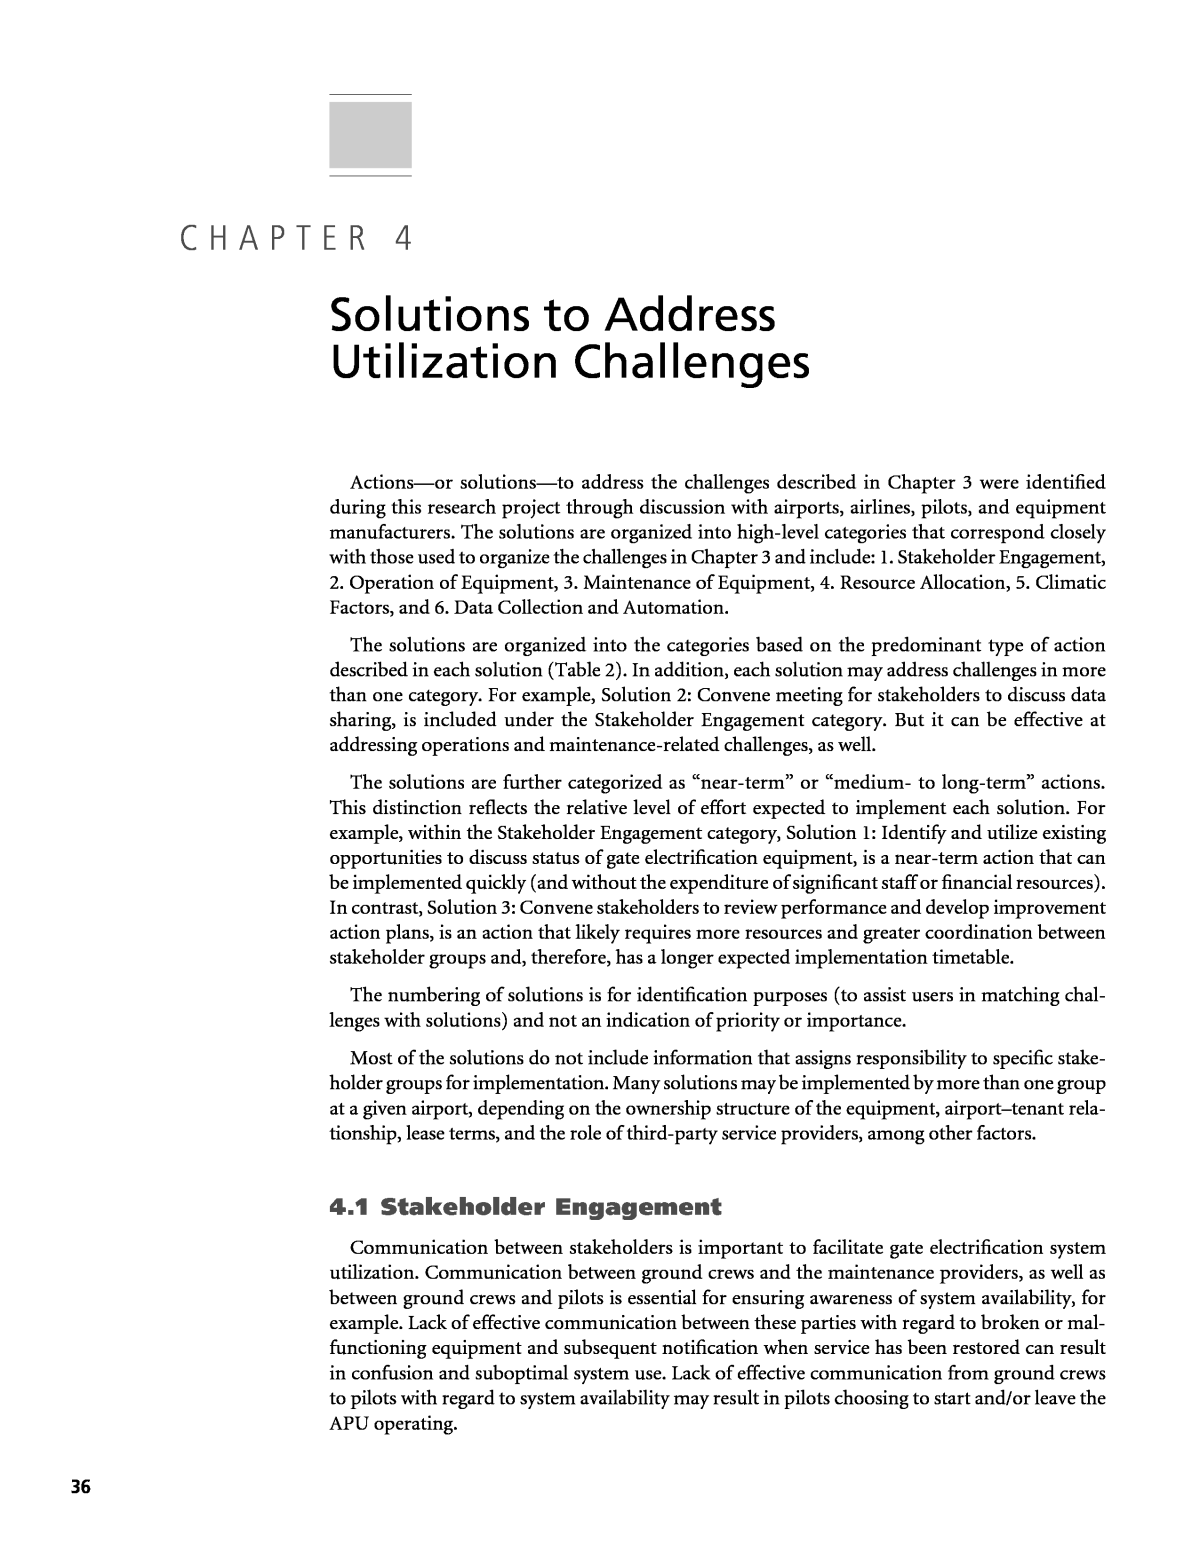 Chapter 4 - Solutions to Address Utilization Challenges, Optimizing the  Use of Electric Preconditioned Air (PCA) and Ground Power Systems for  Airports